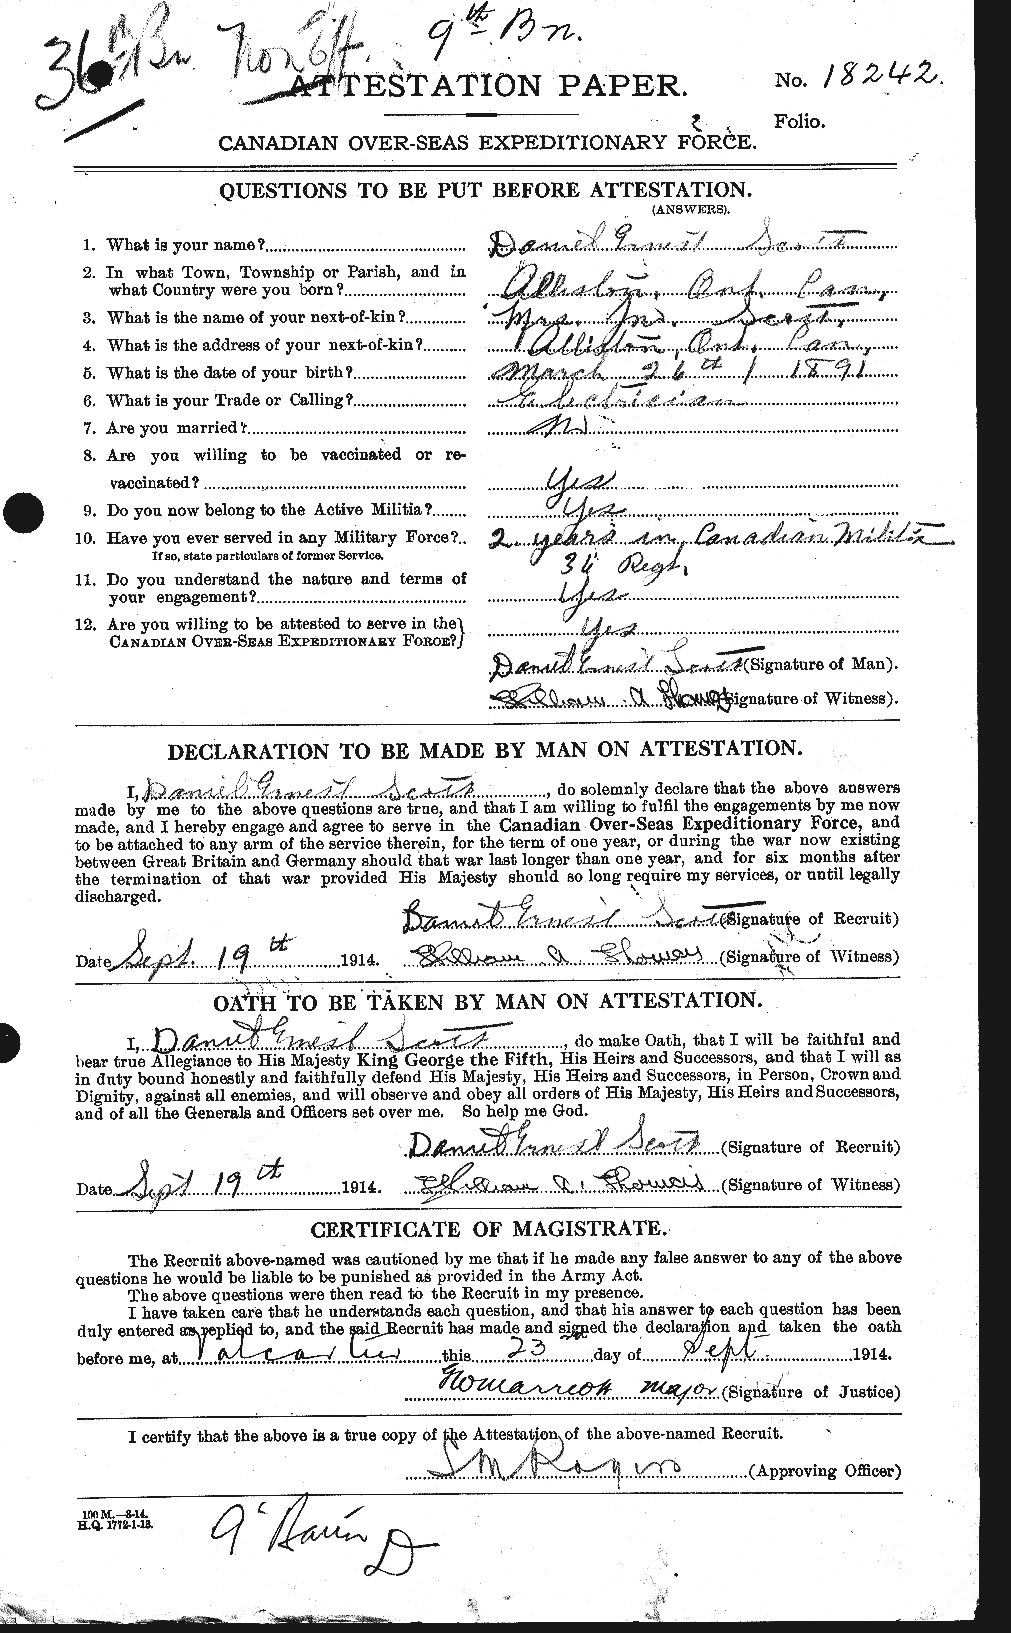 Personnel Records of the First World War - CEF 085616a